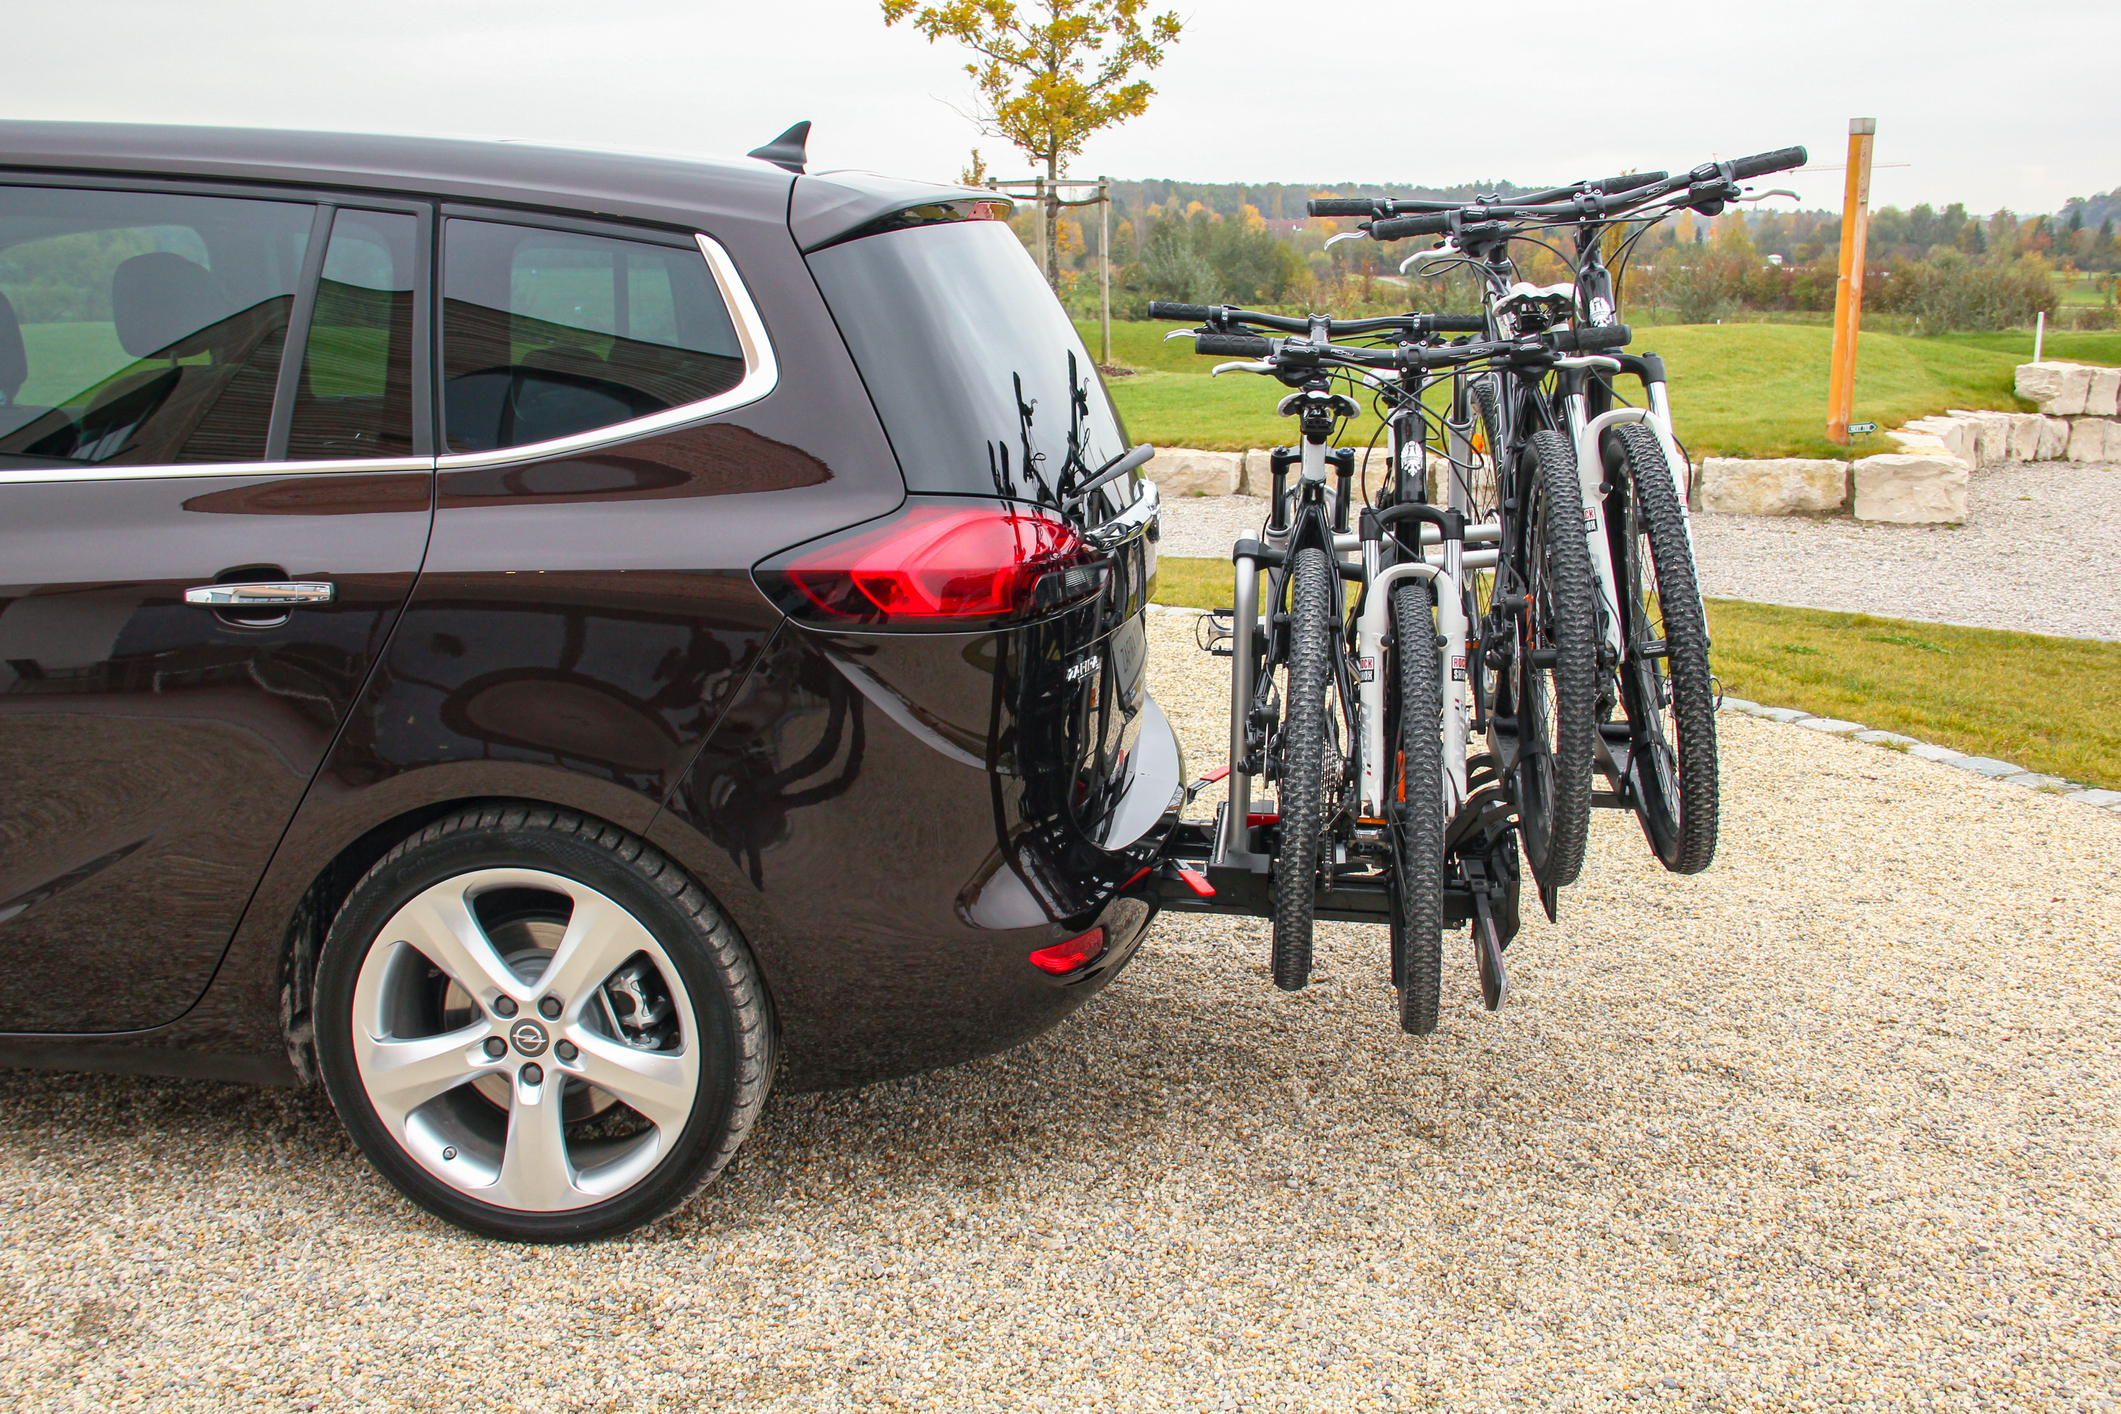 Pros and Cons of Different Bike Racks